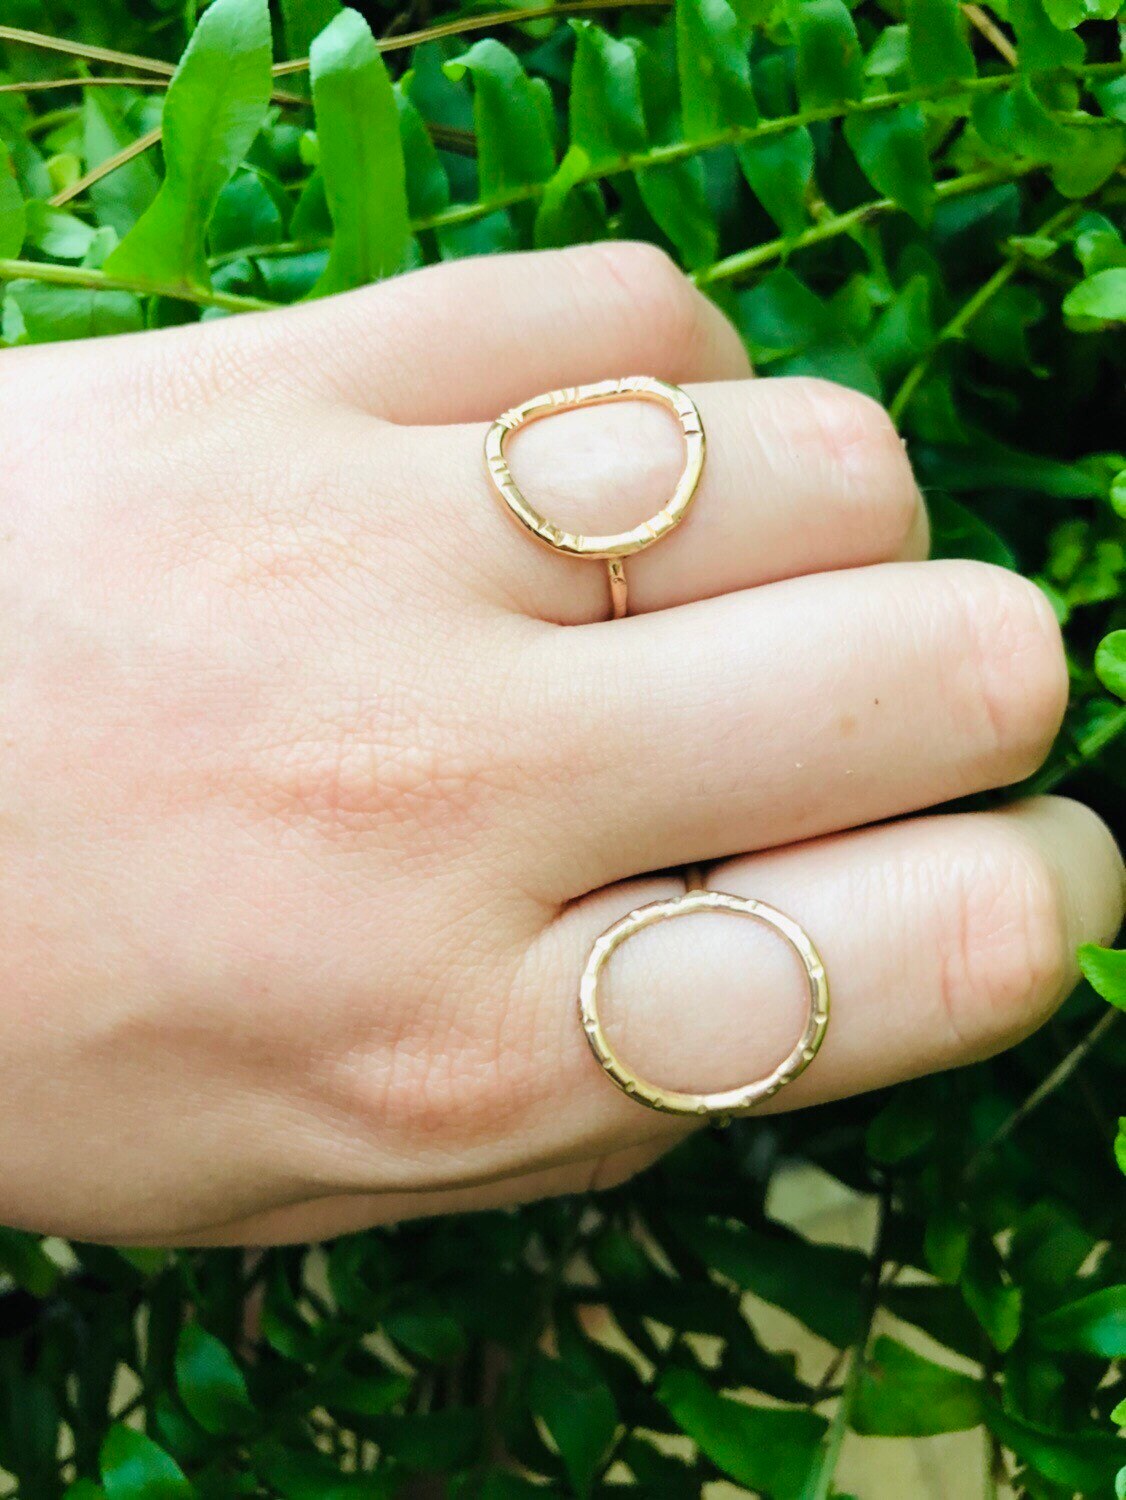 Gold filled / Silver O ring • All sizes avaliable • Etched O Ring • Gold O ring • gold circle ring • gifts for her